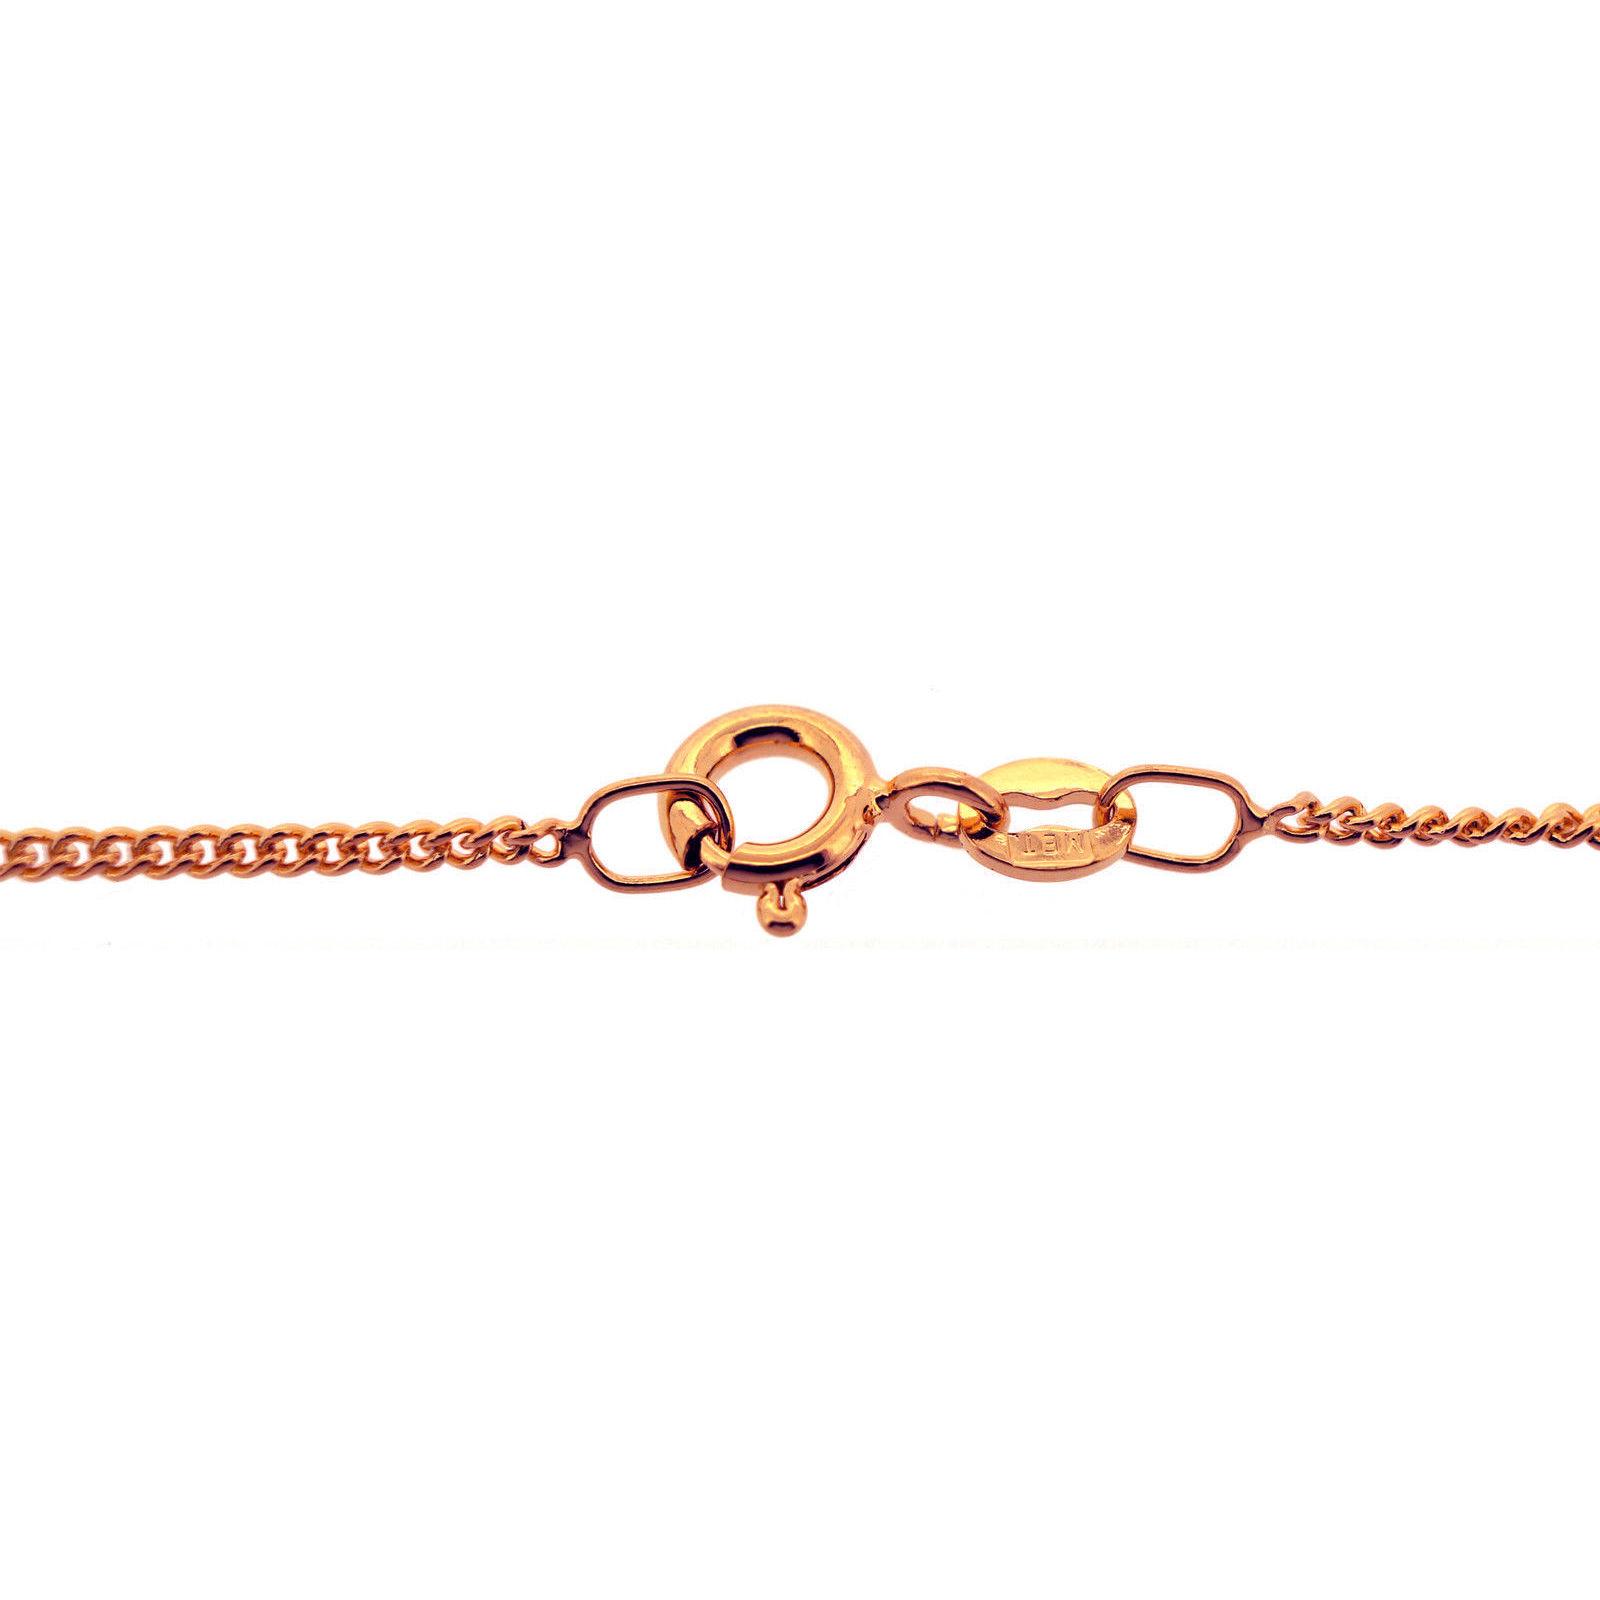 Italian made Organically E-coated 9ct Rose Gold Plated 1.4mm Curb Chains